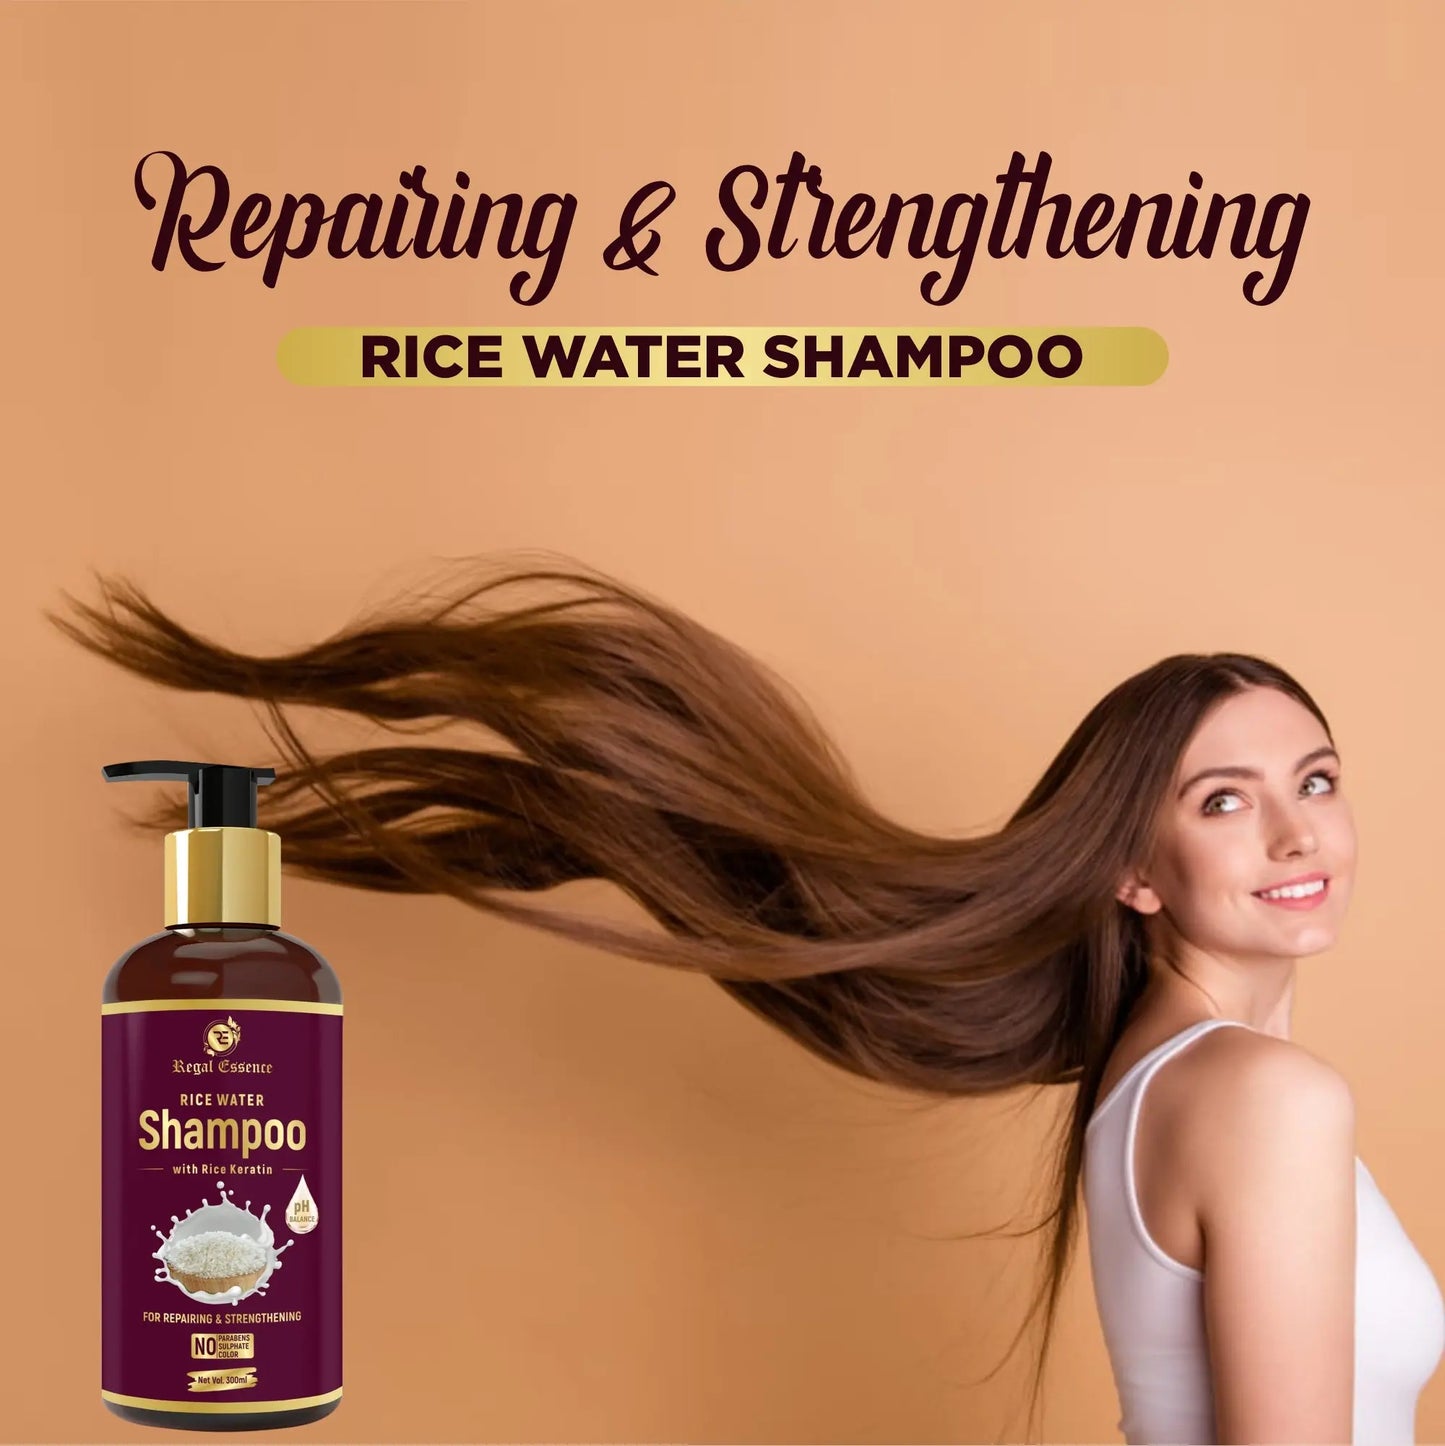 Regal Essence Rice Water Shampoo With Rice Keratin For Damaged, Dry & Frizzy Hair (300 ml) VedapureNaturals